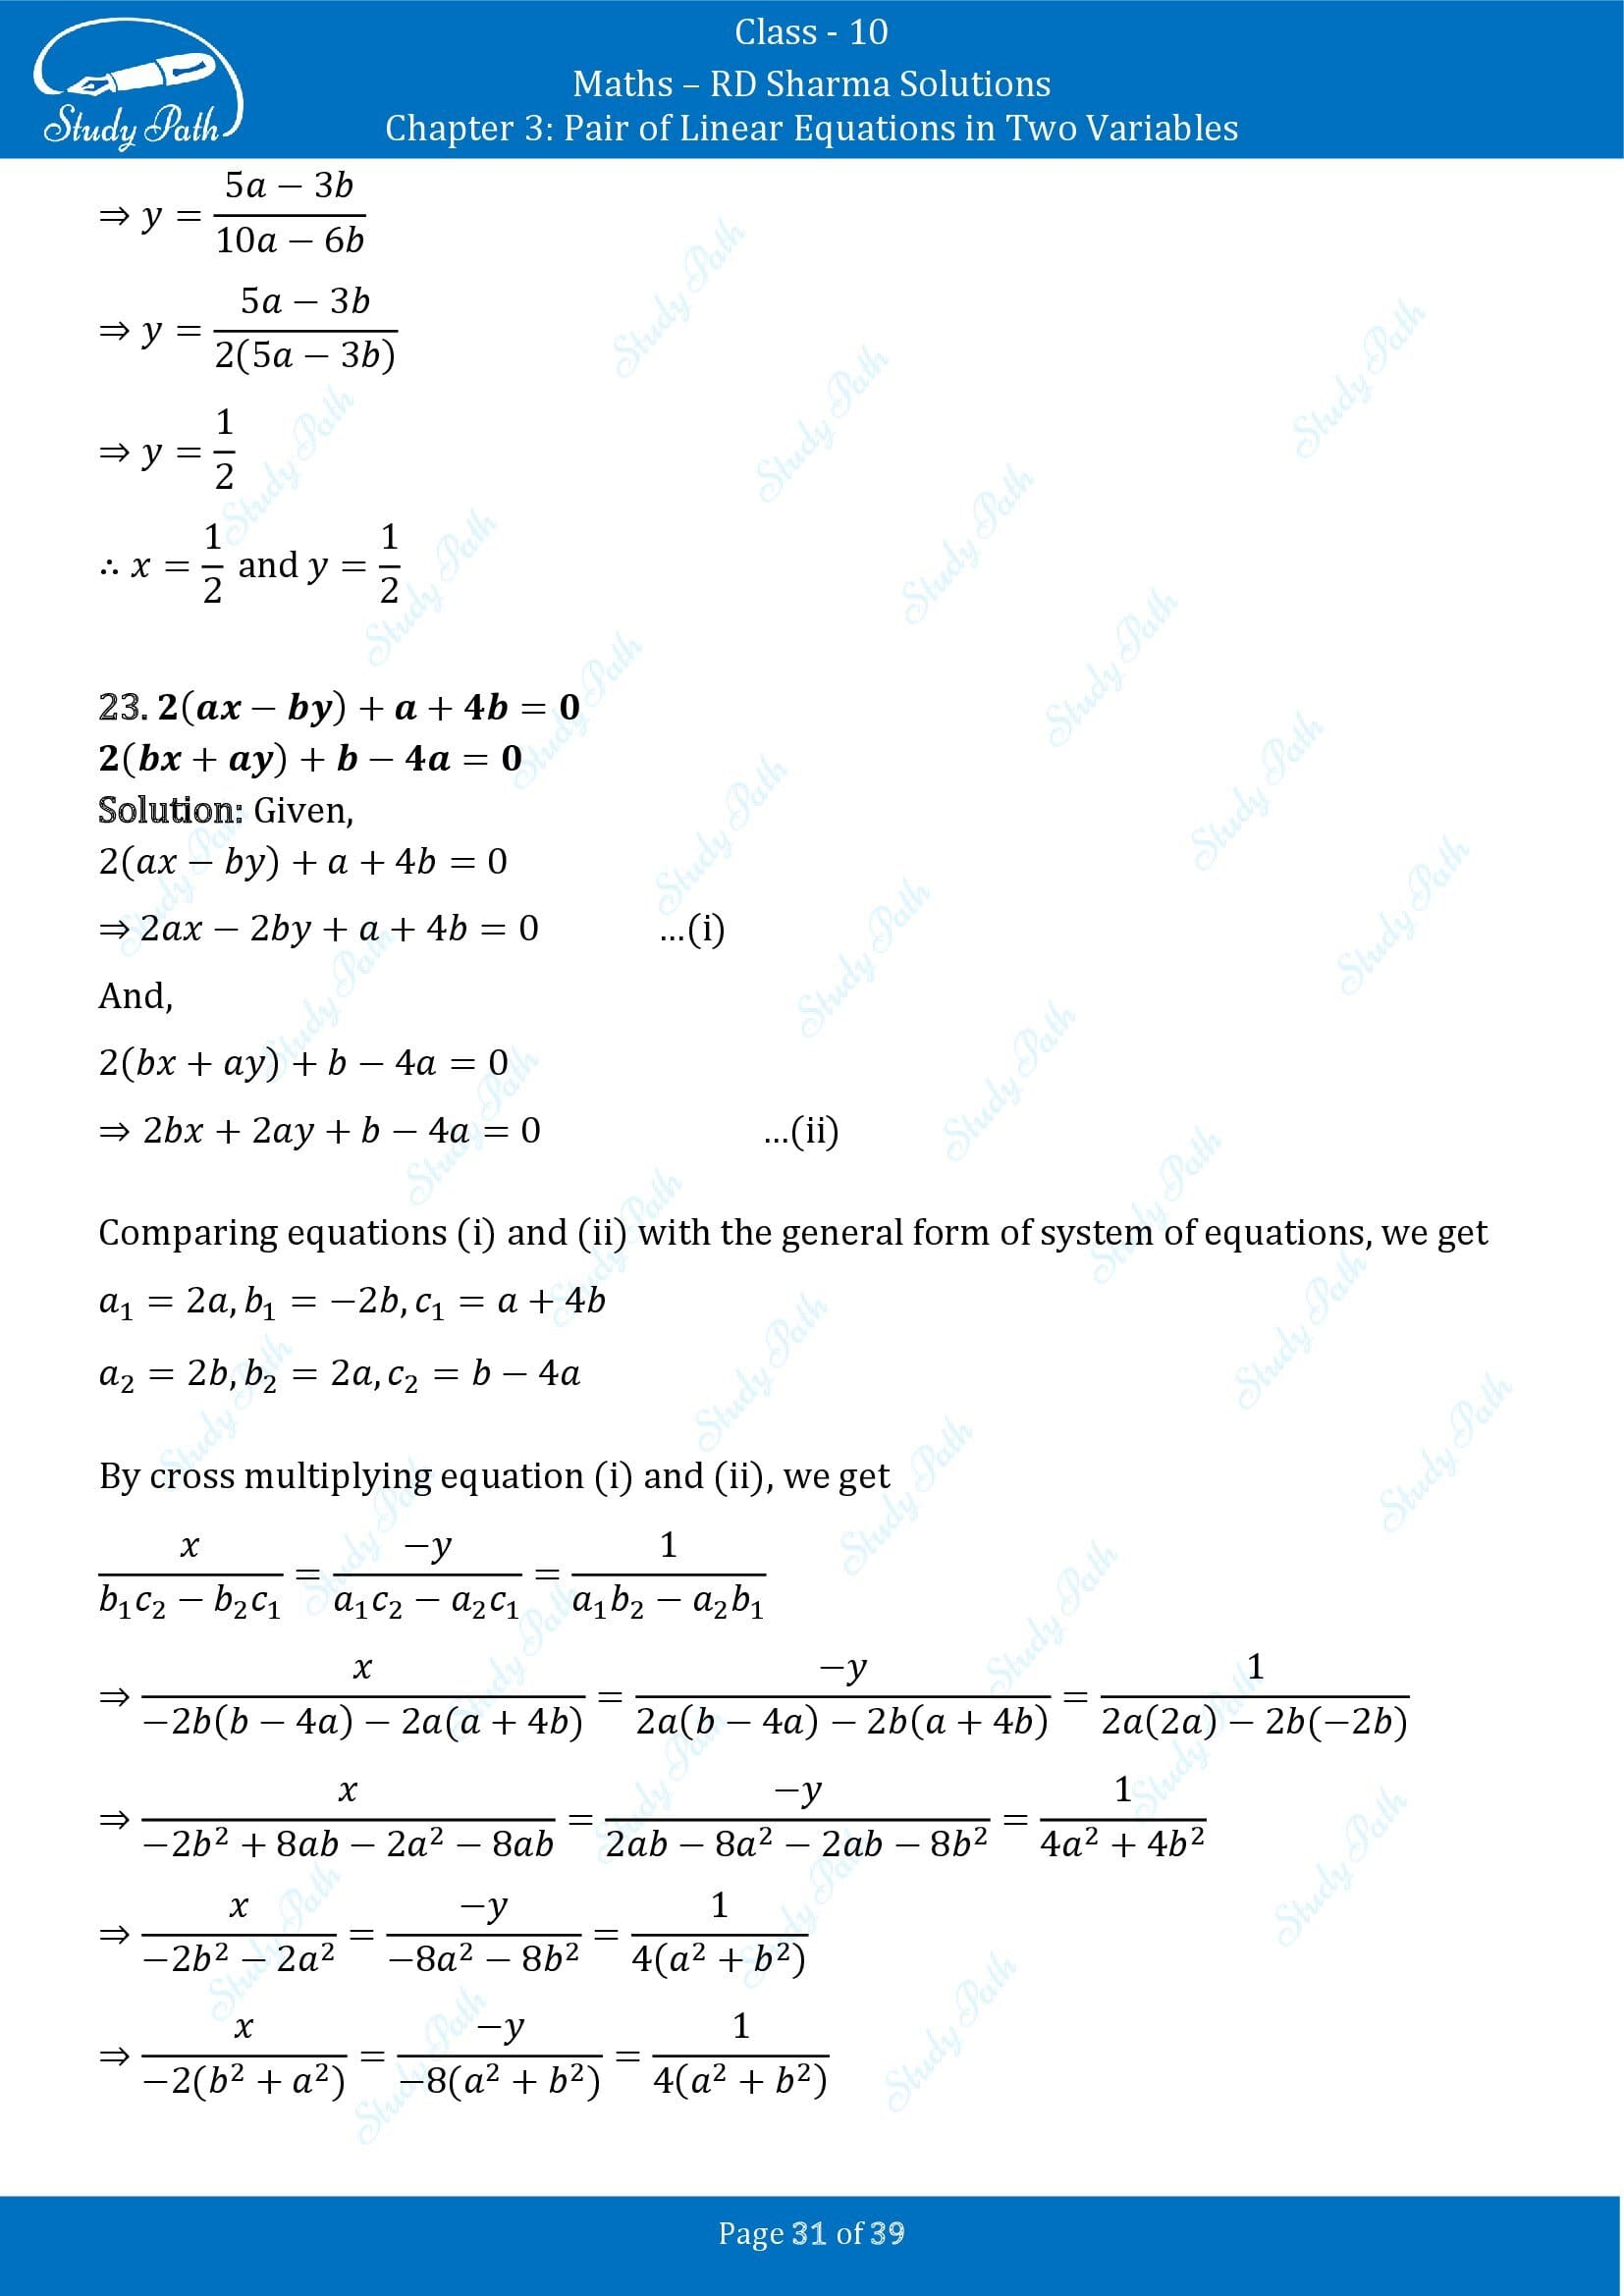 RD Sharma Solutions Class 10 Chapter 3 Pair of Linear Equations in Two Variables Exercise 3.4 00031